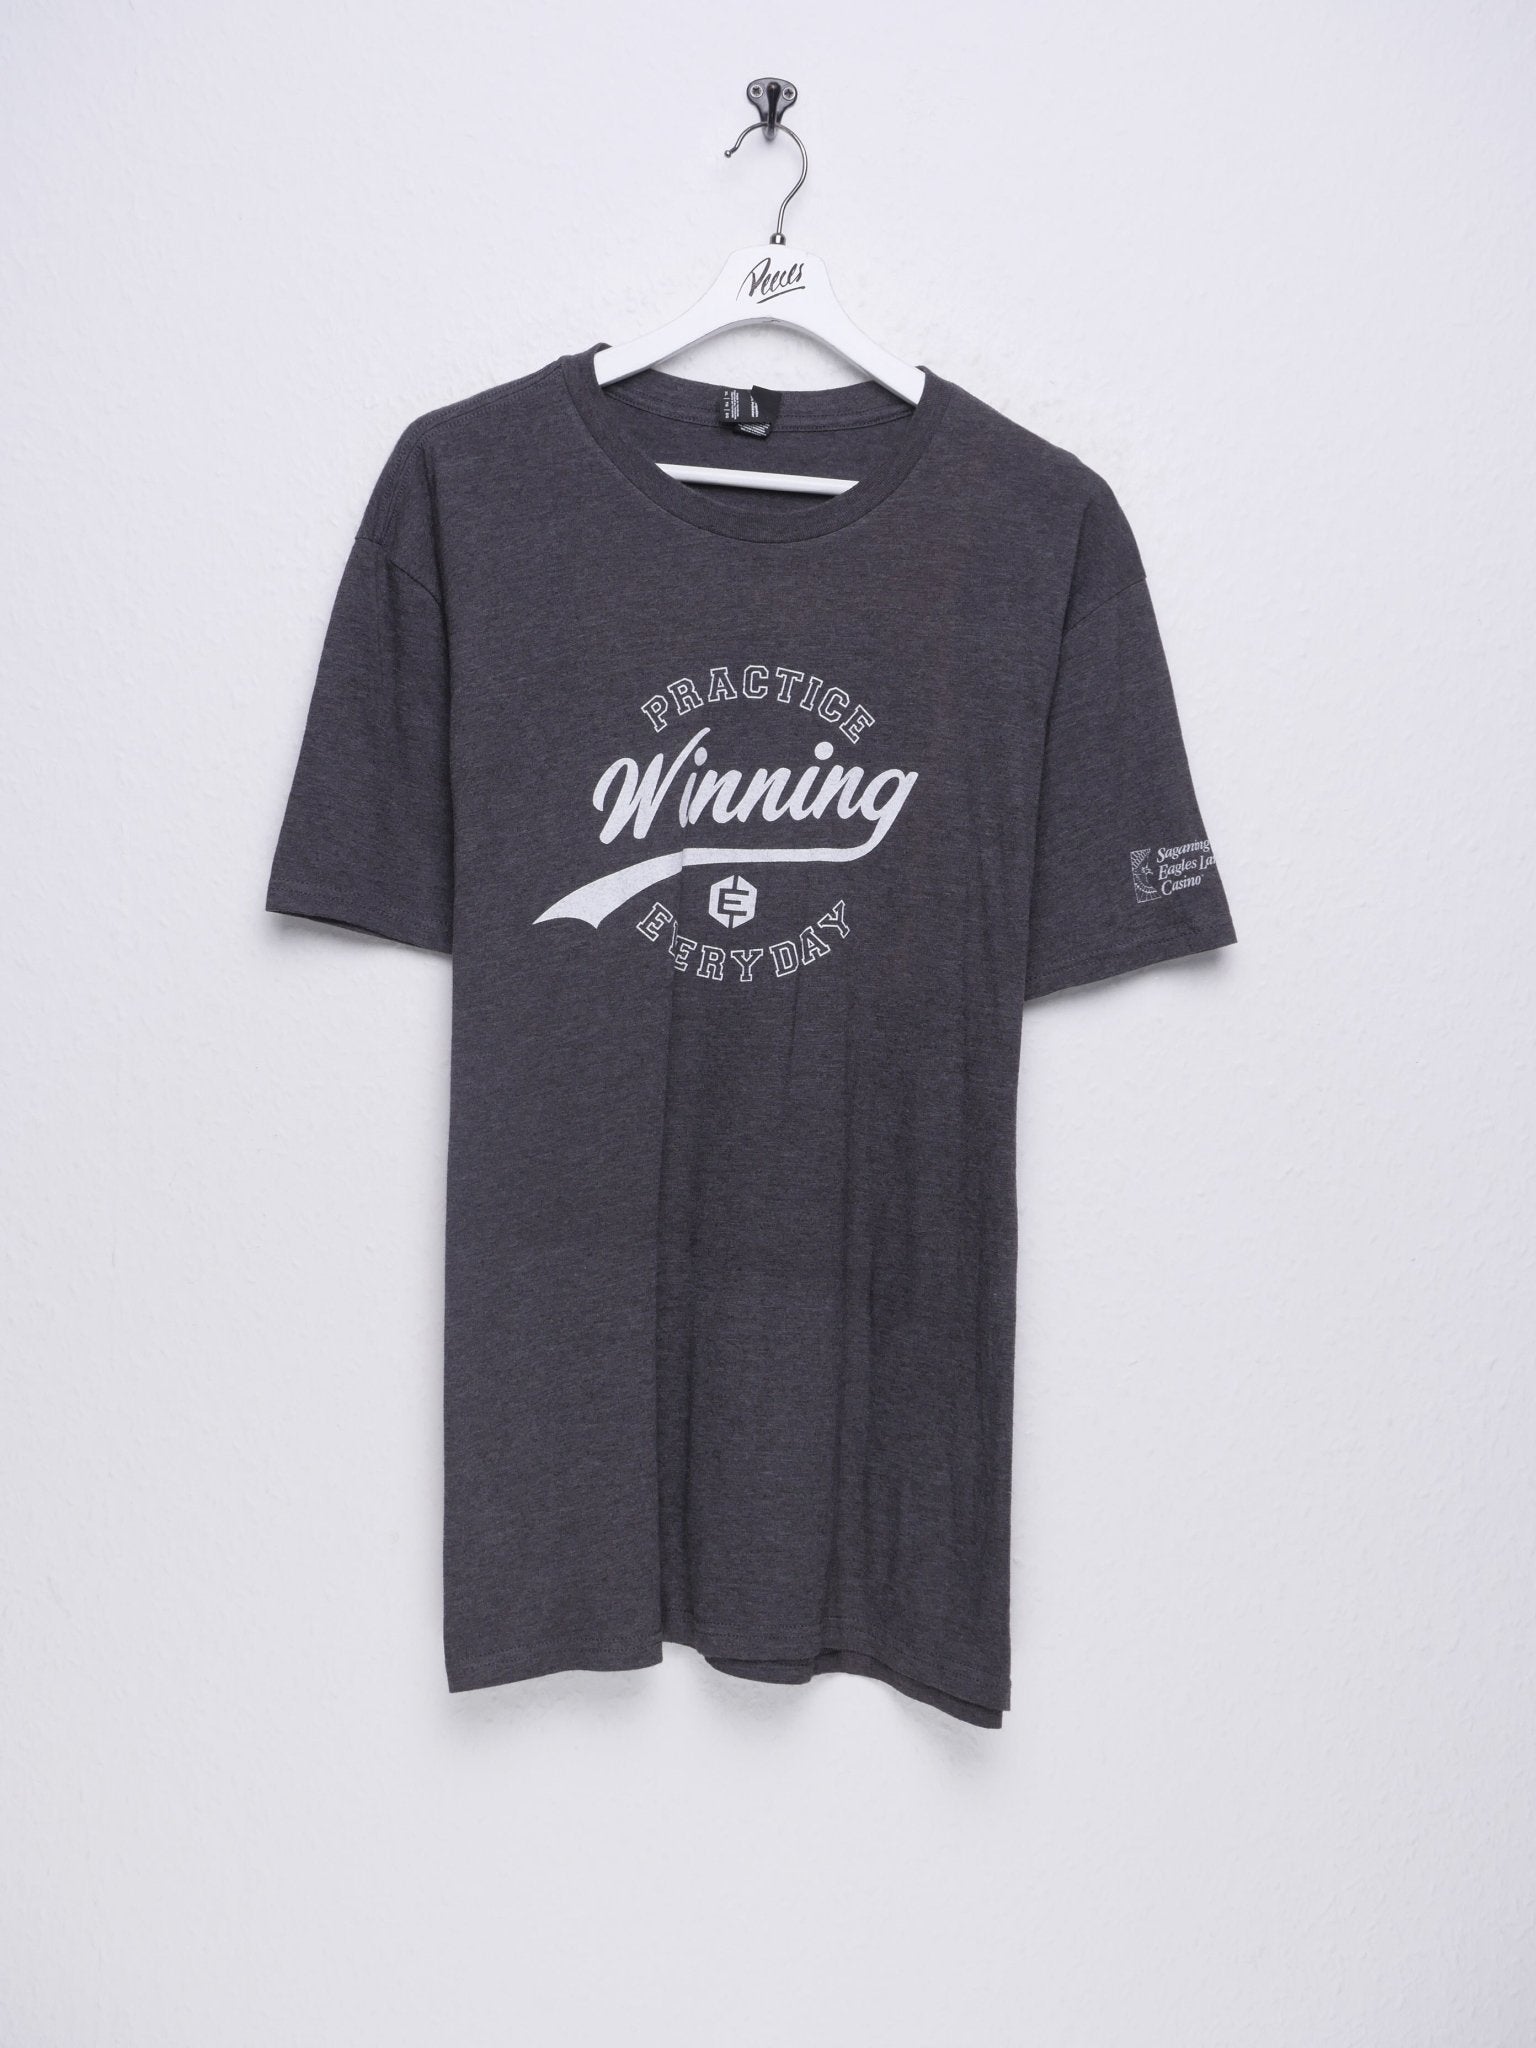 Practice Winning Everyday printed Spellout Shirt - Peeces